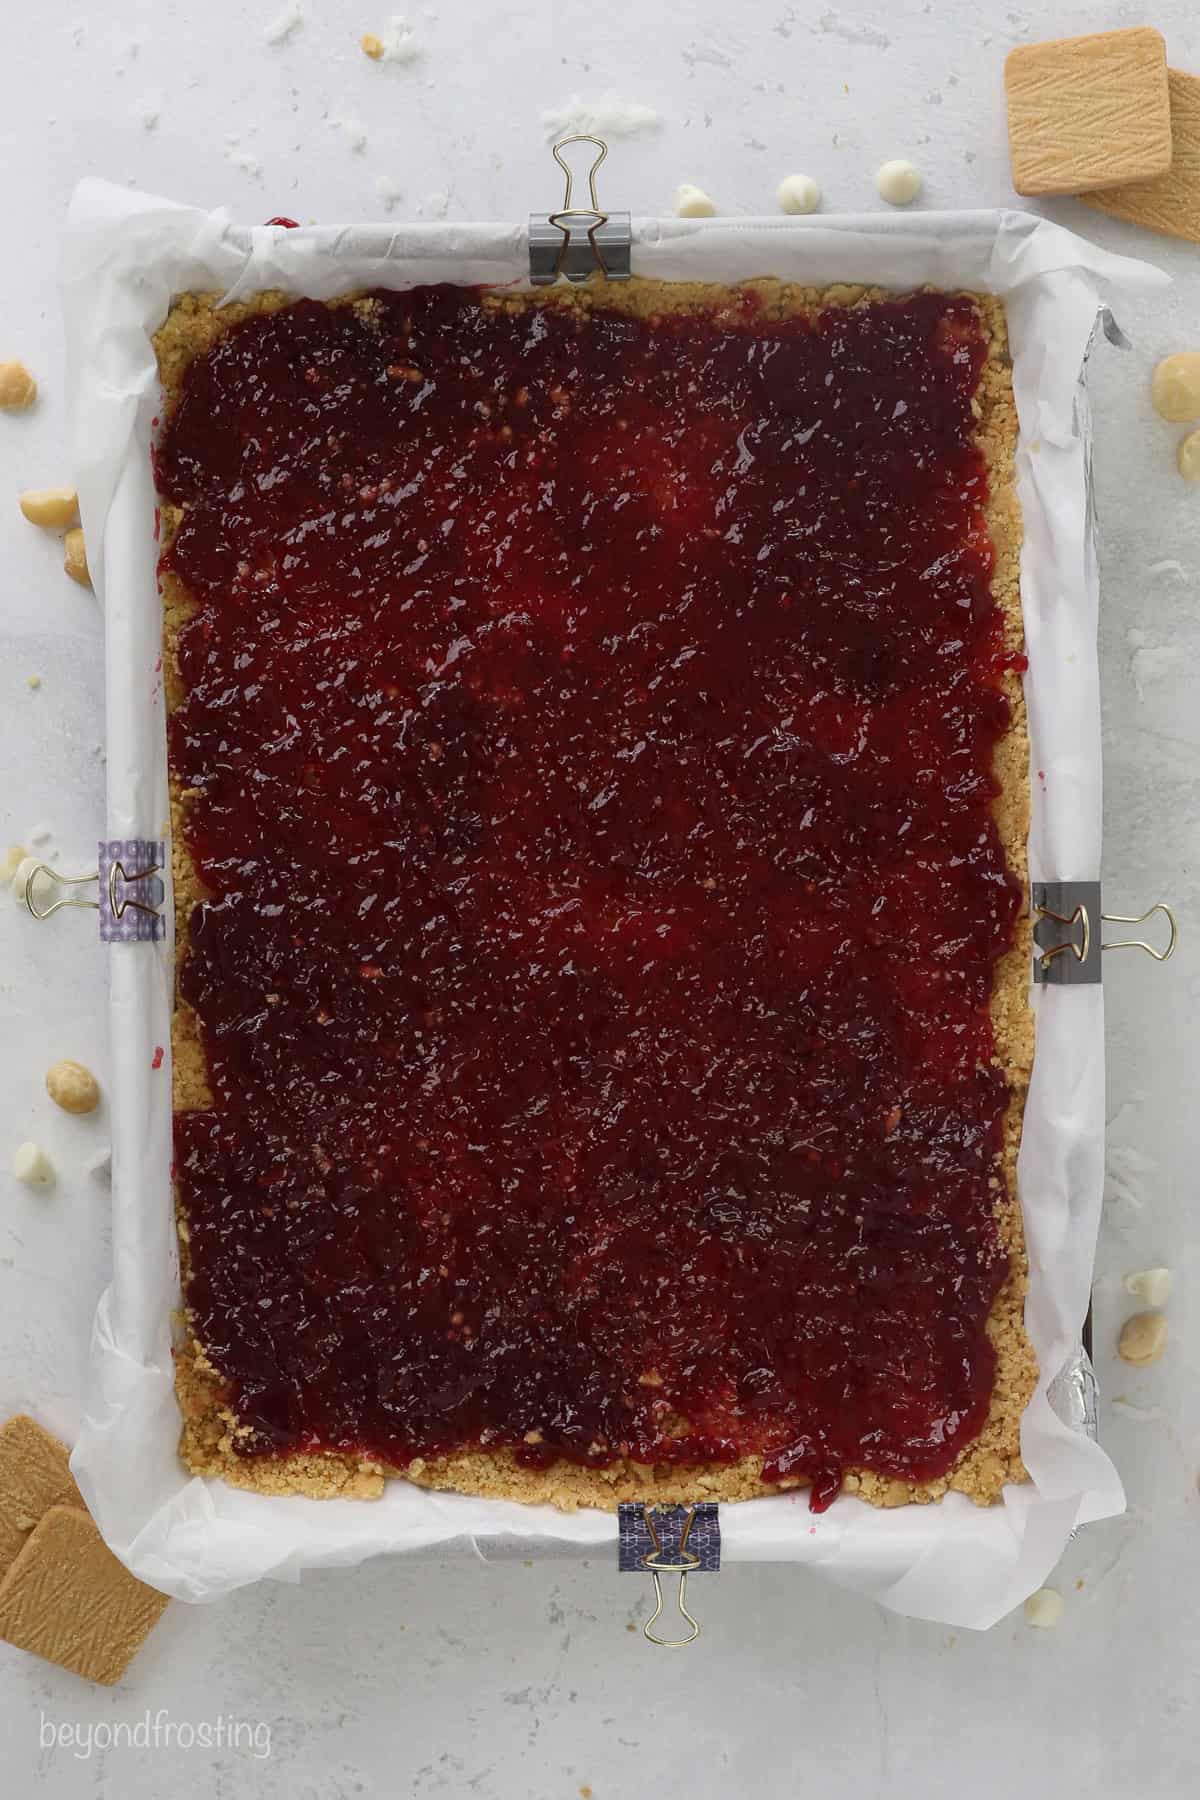 Raspberry jam spread over a shortbread crust in a large baking pan.